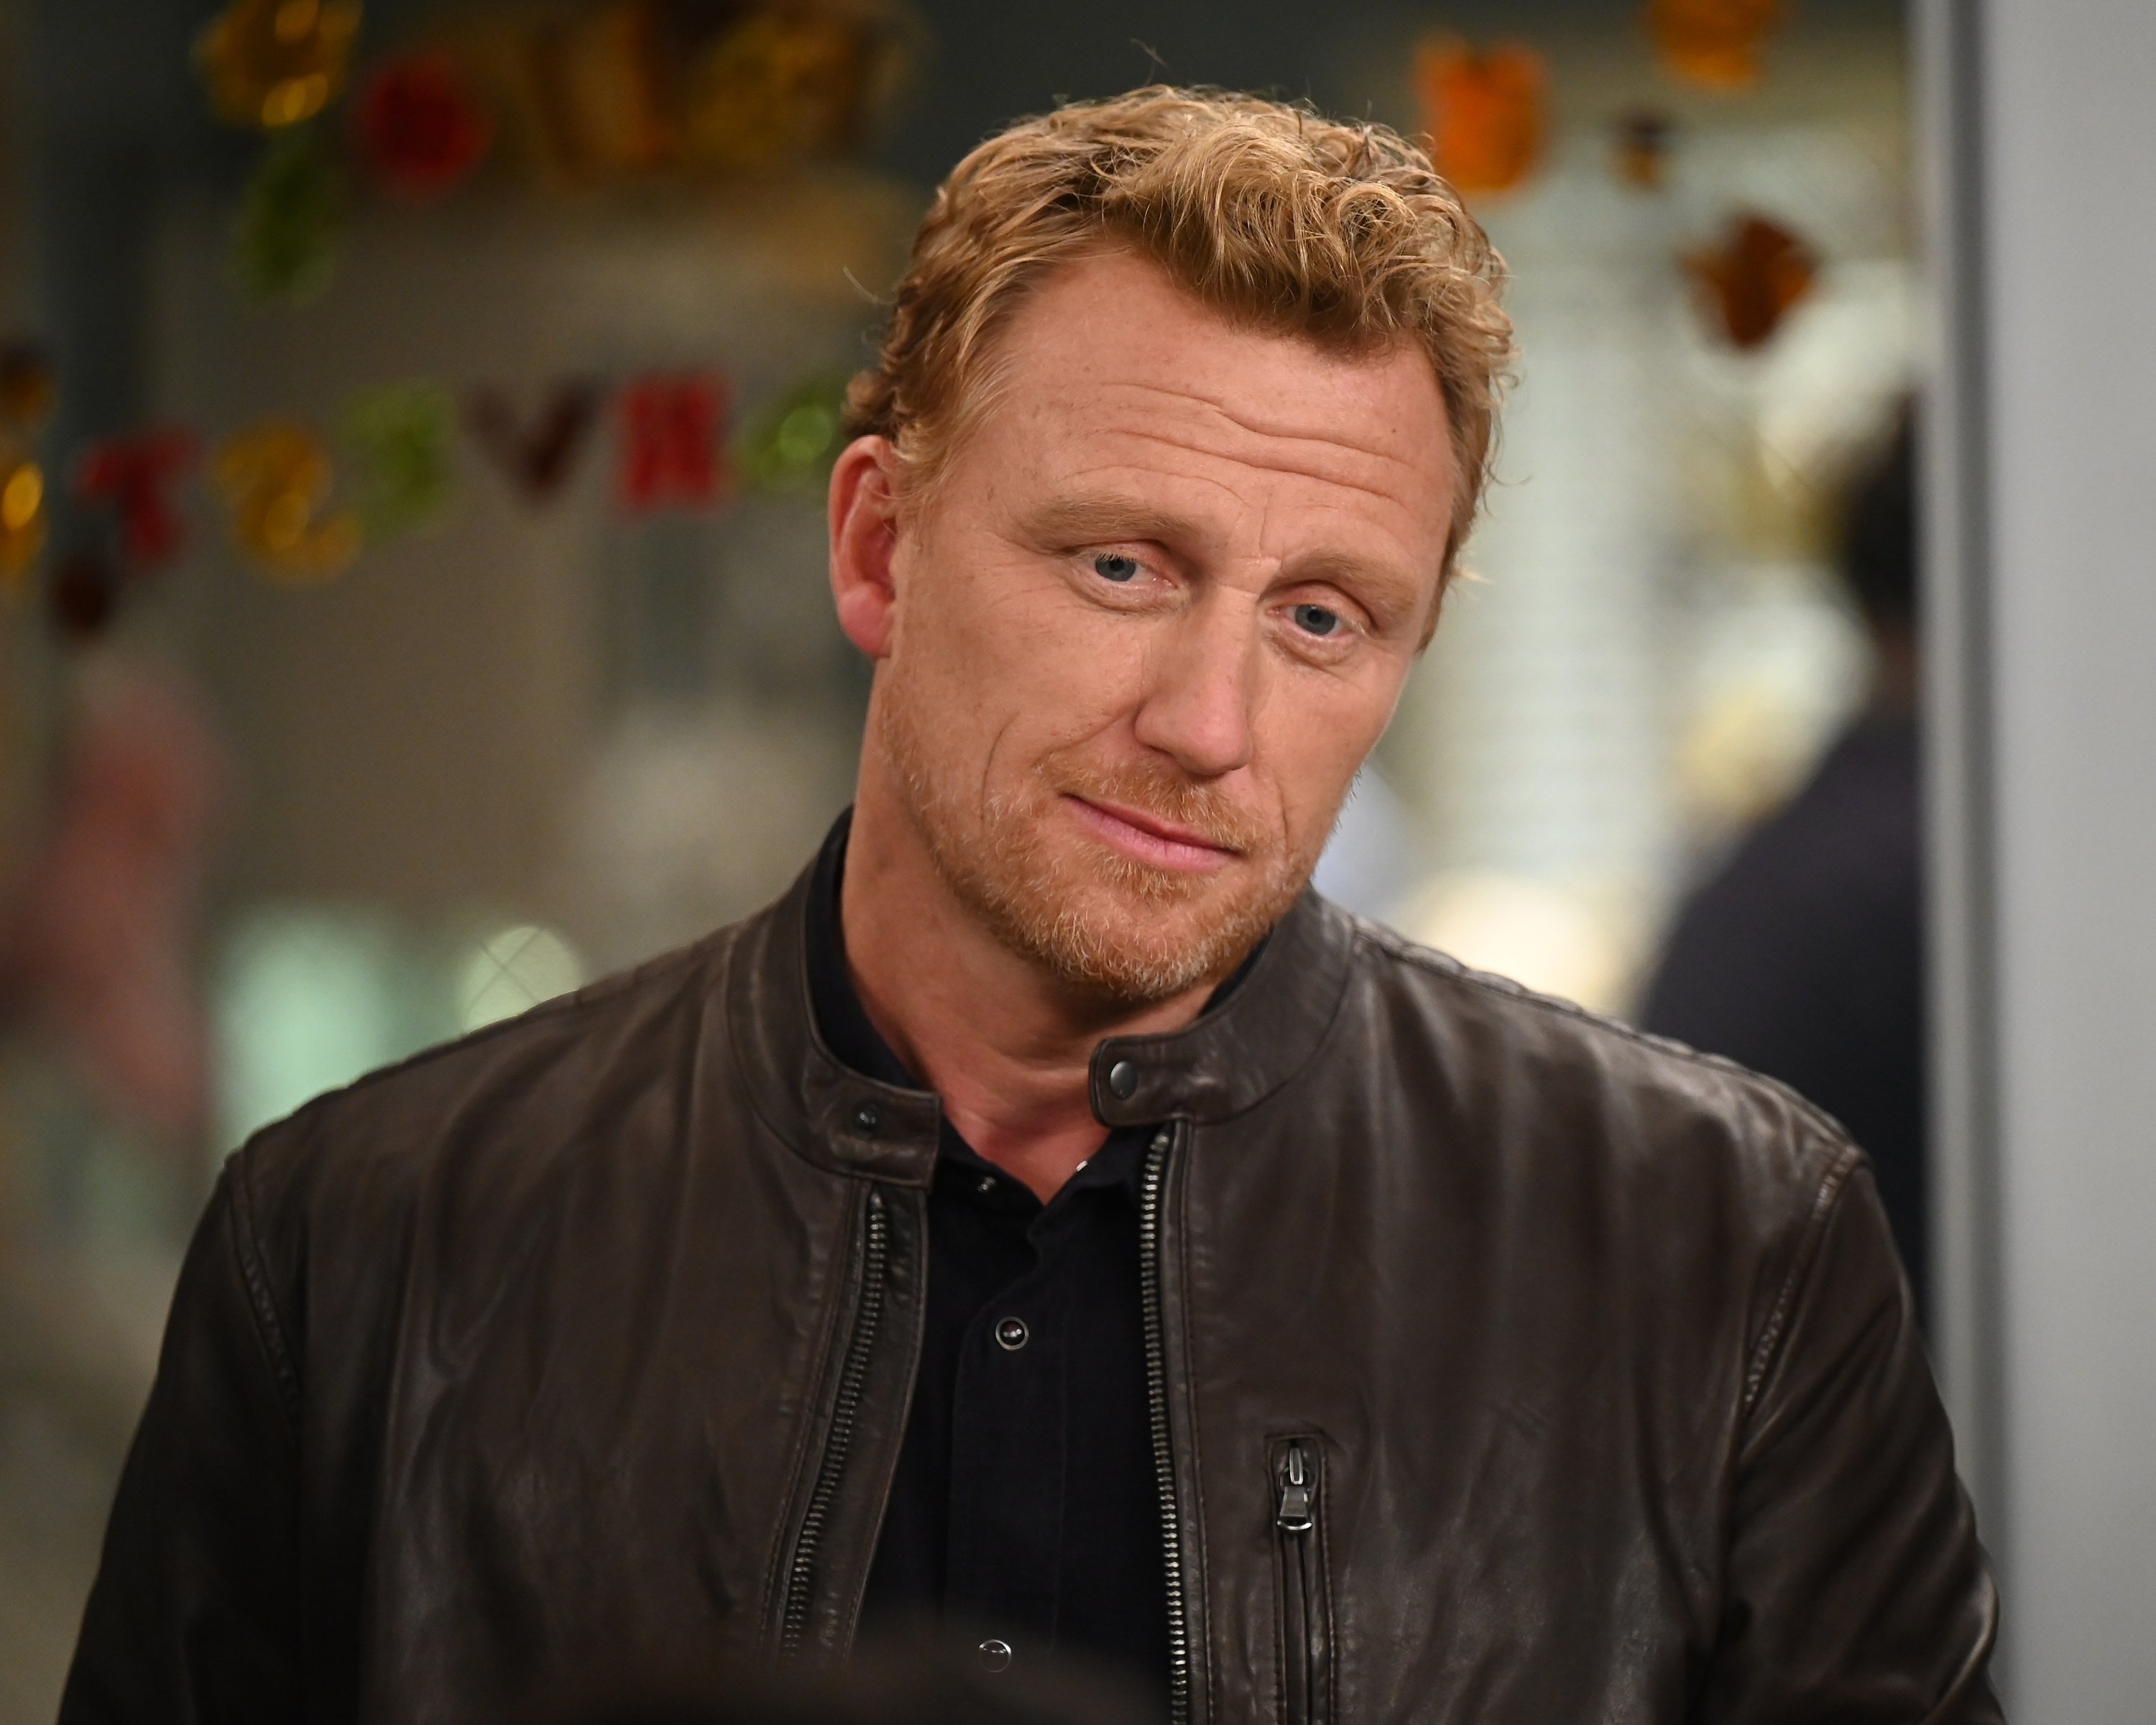 Kevin McKidd playing Owen Hunt whose in danger when 'Station 19' and 'Grey's Anatomy' return